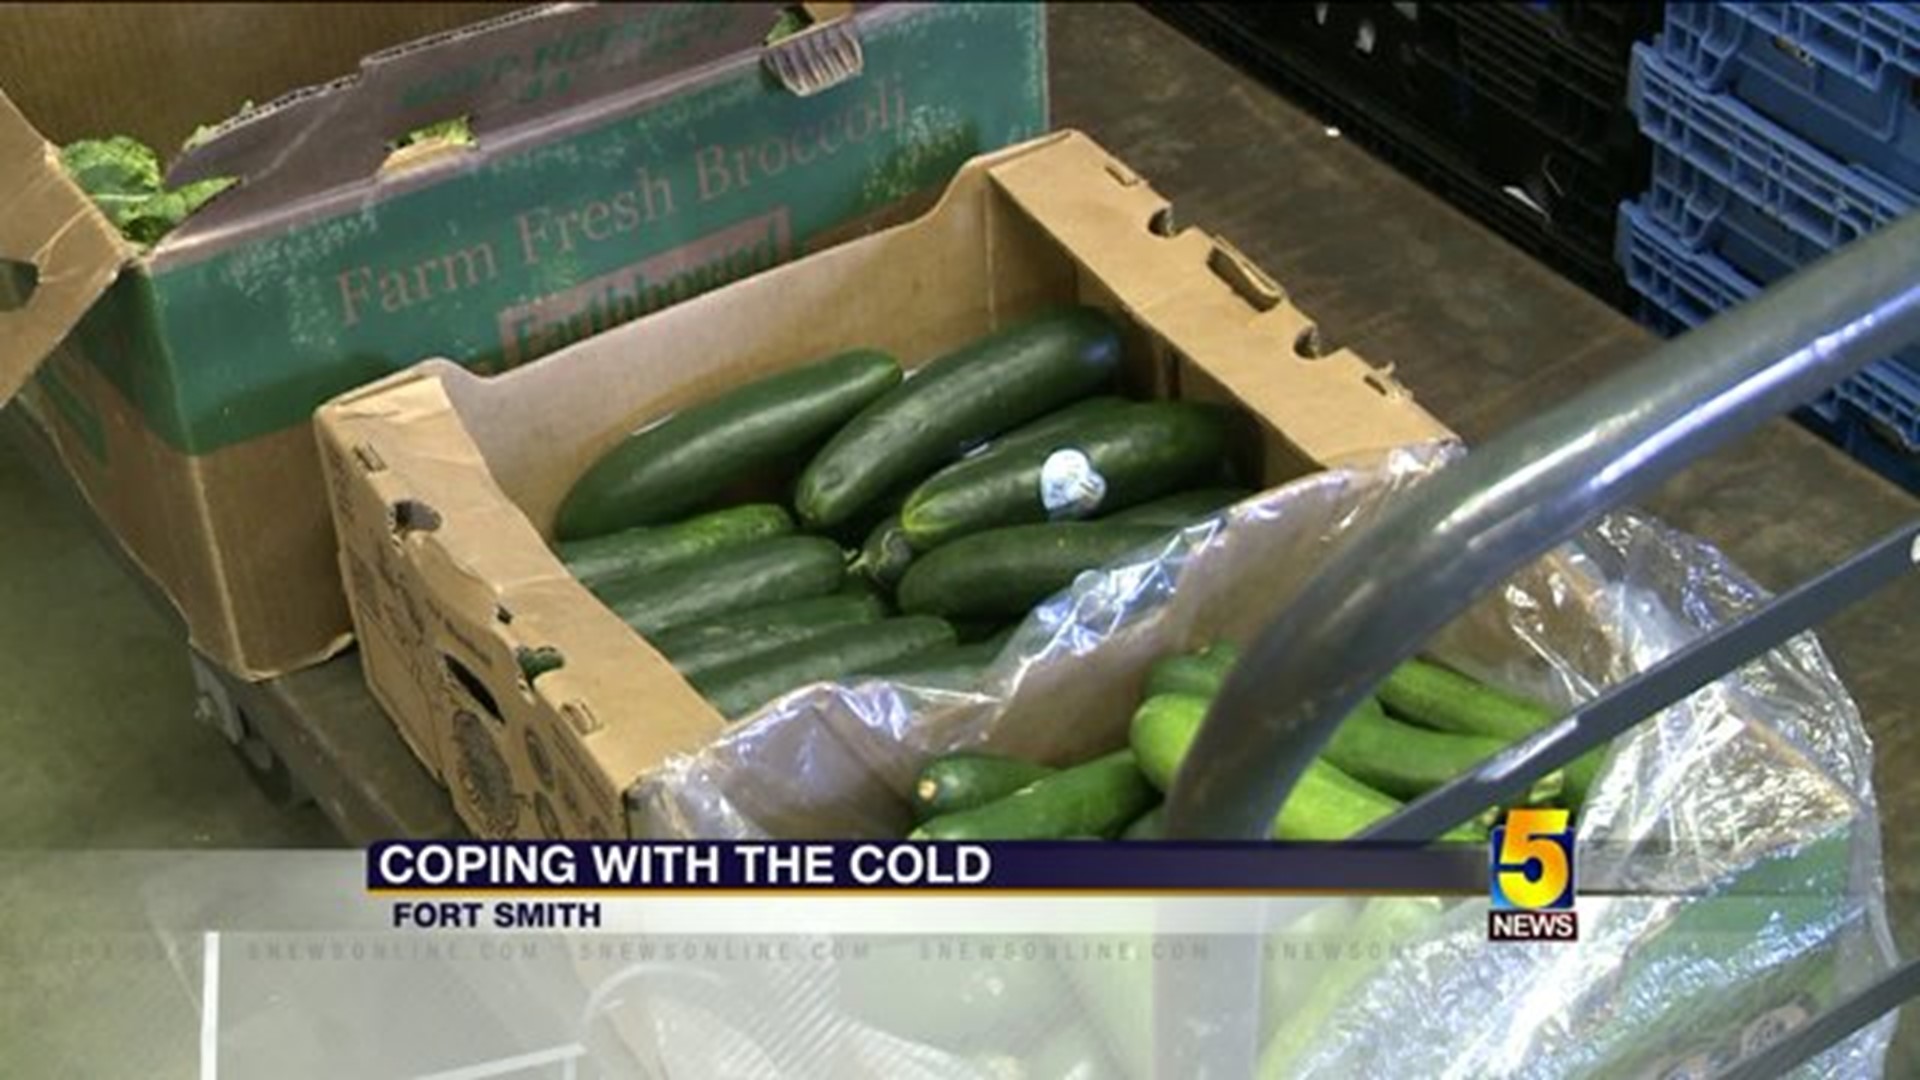 Food Bank Coping With Cold